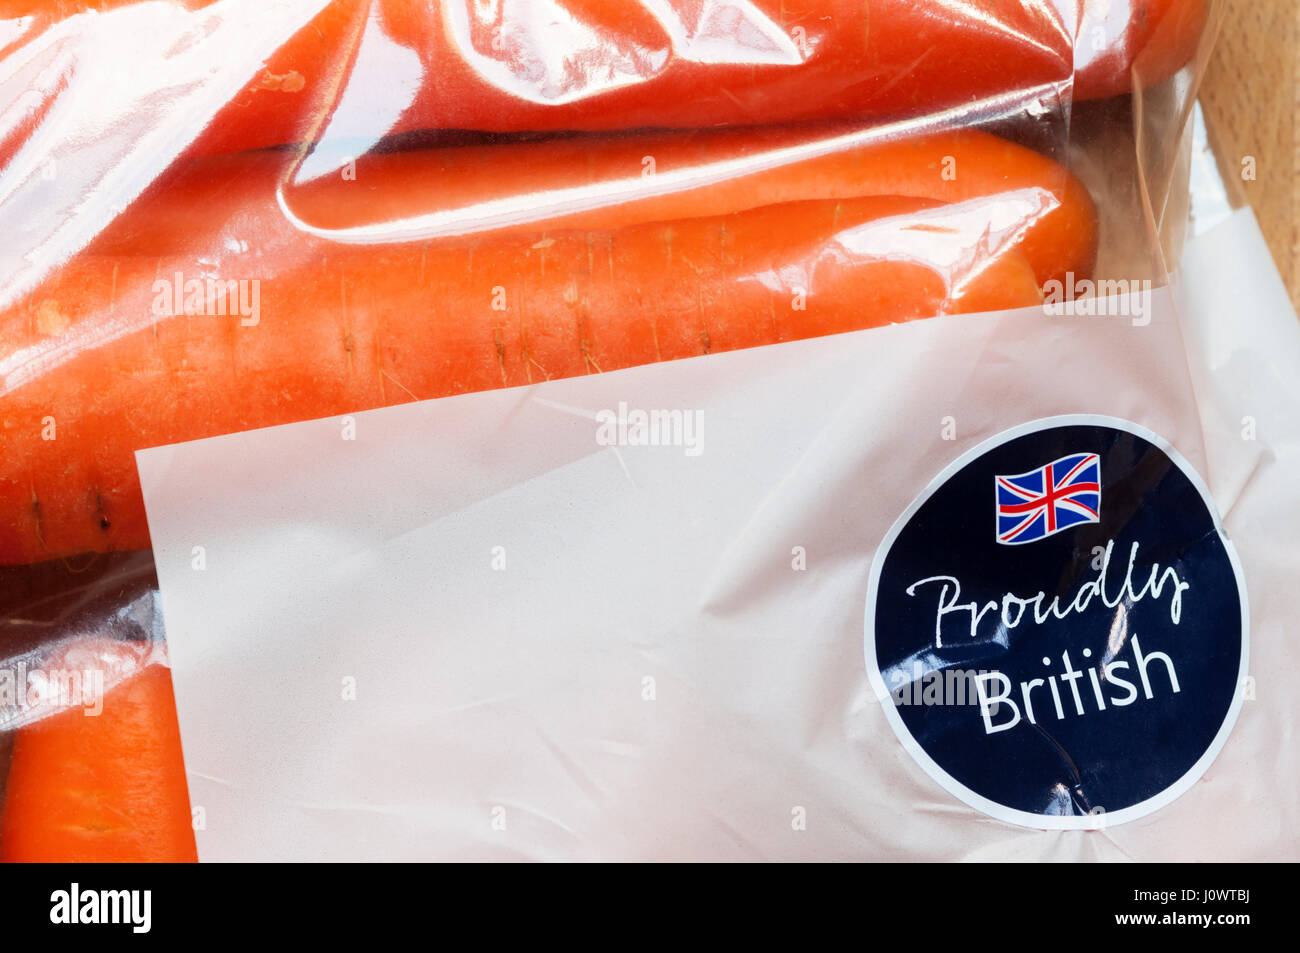 Proudly British label with Union Jack flag on a bag of carrots from Waitrose. Stock Photo